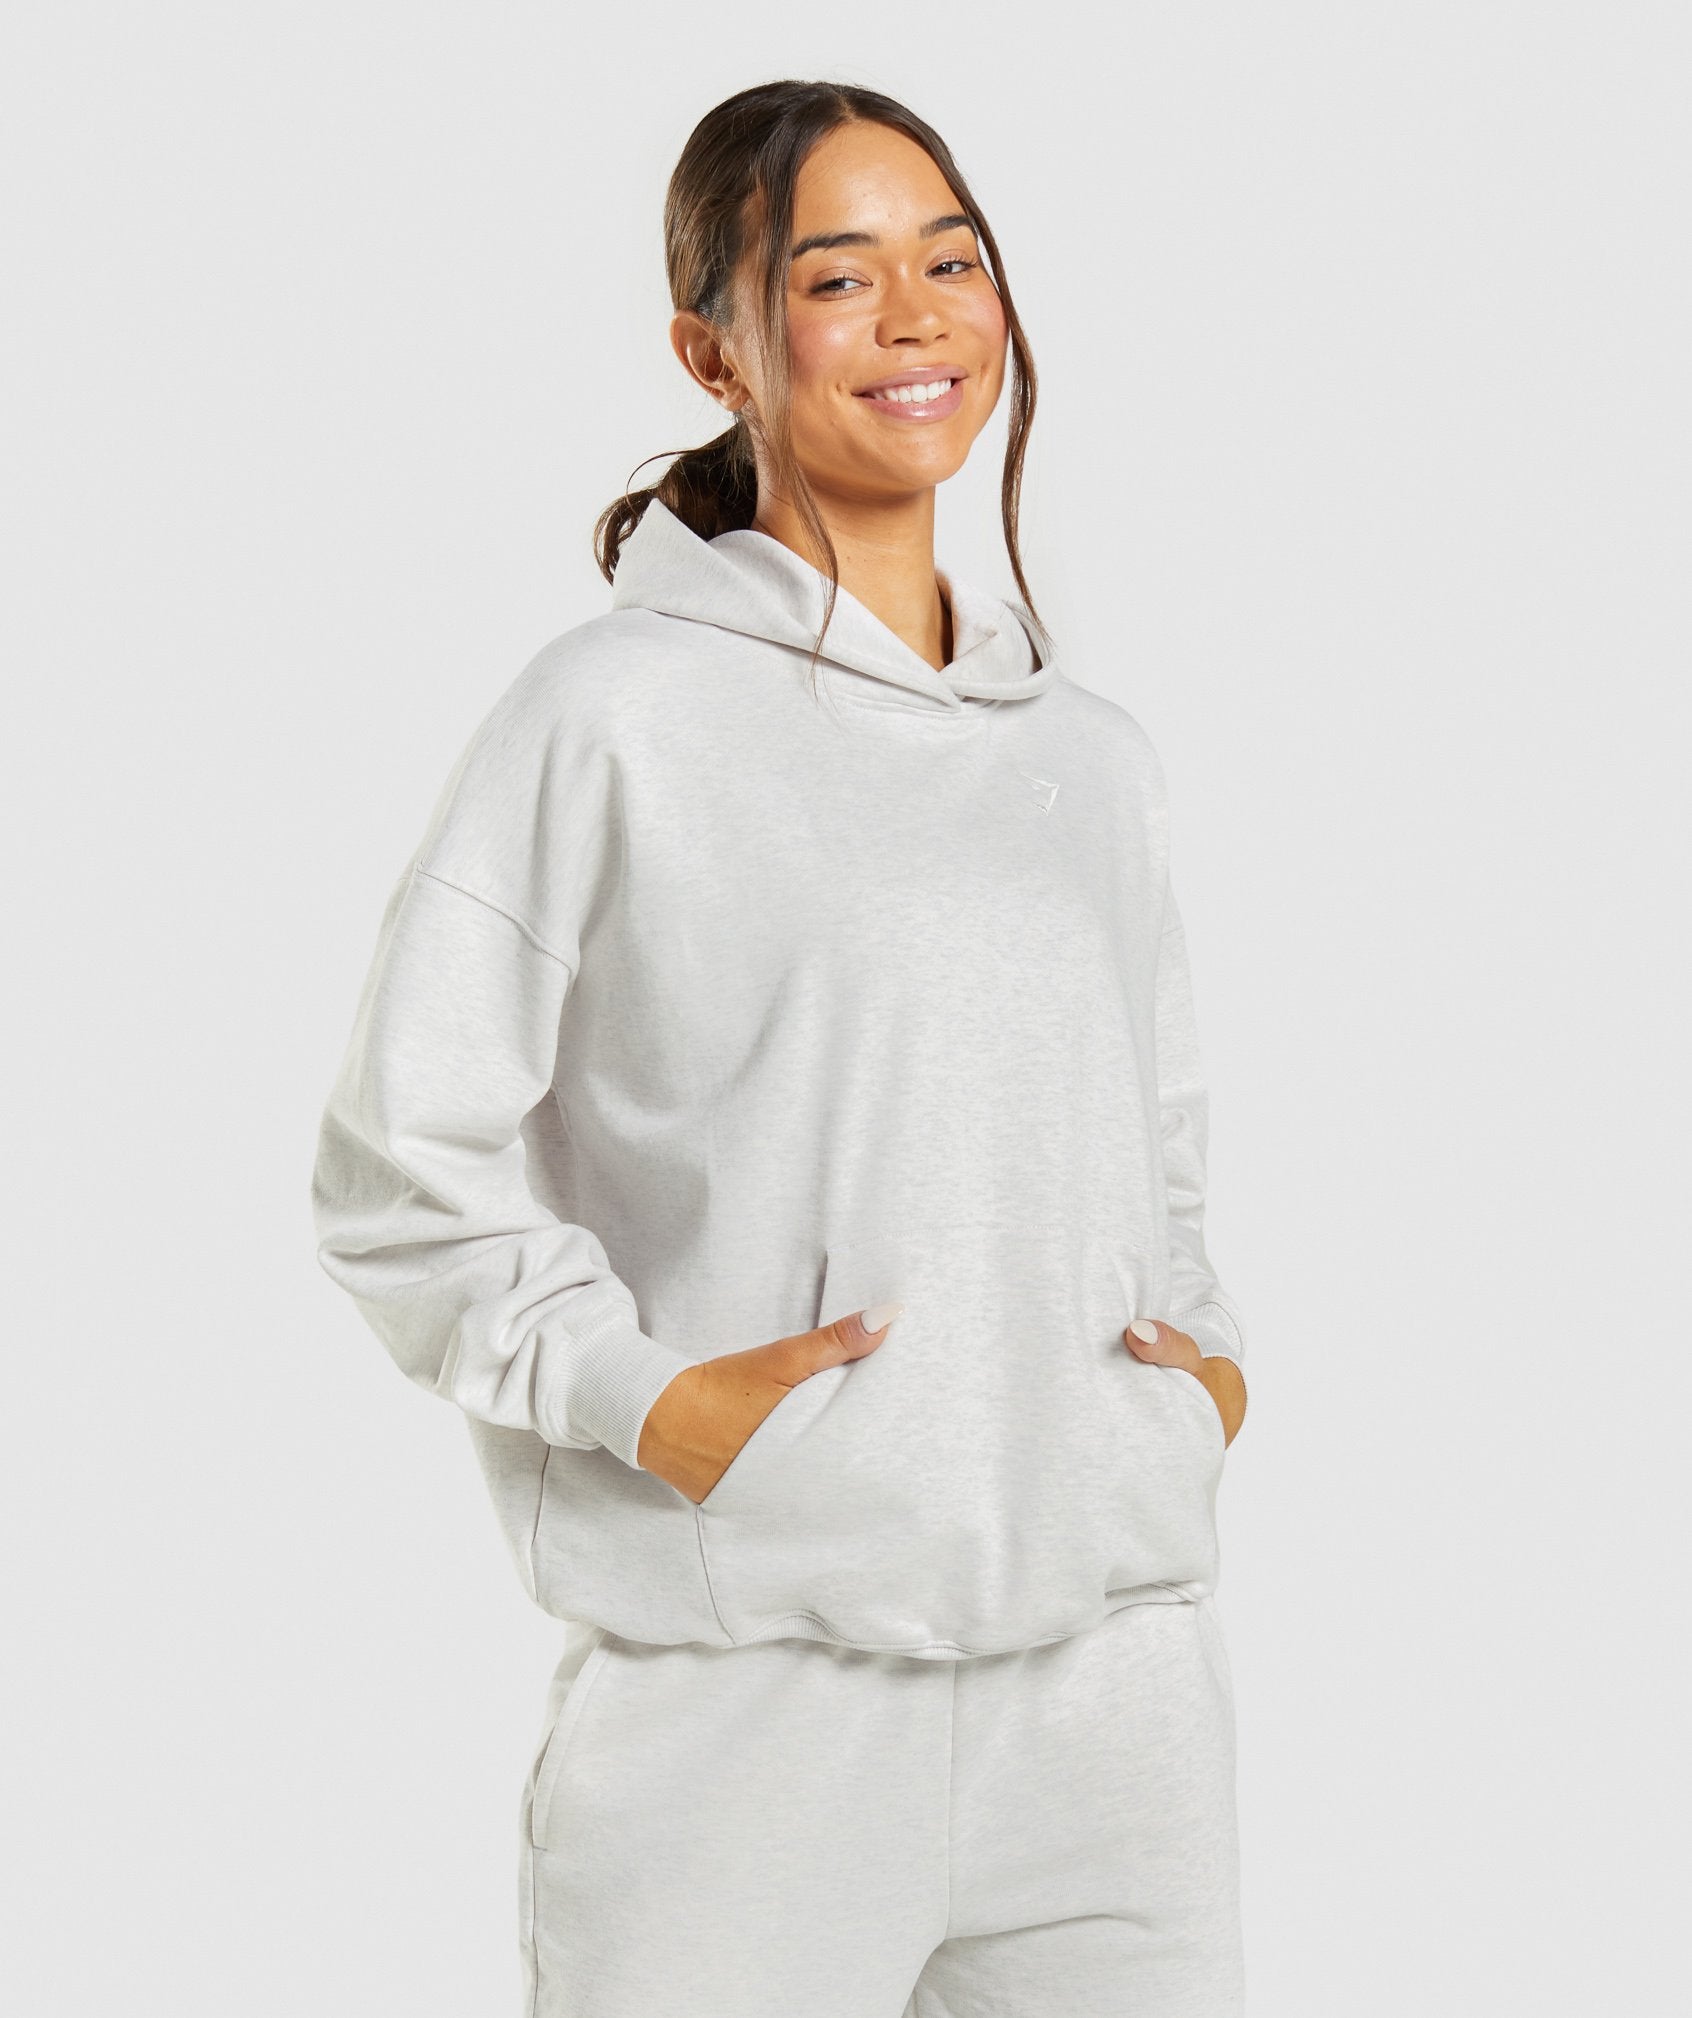 Rest Day Sweats Hoodie in White Marl